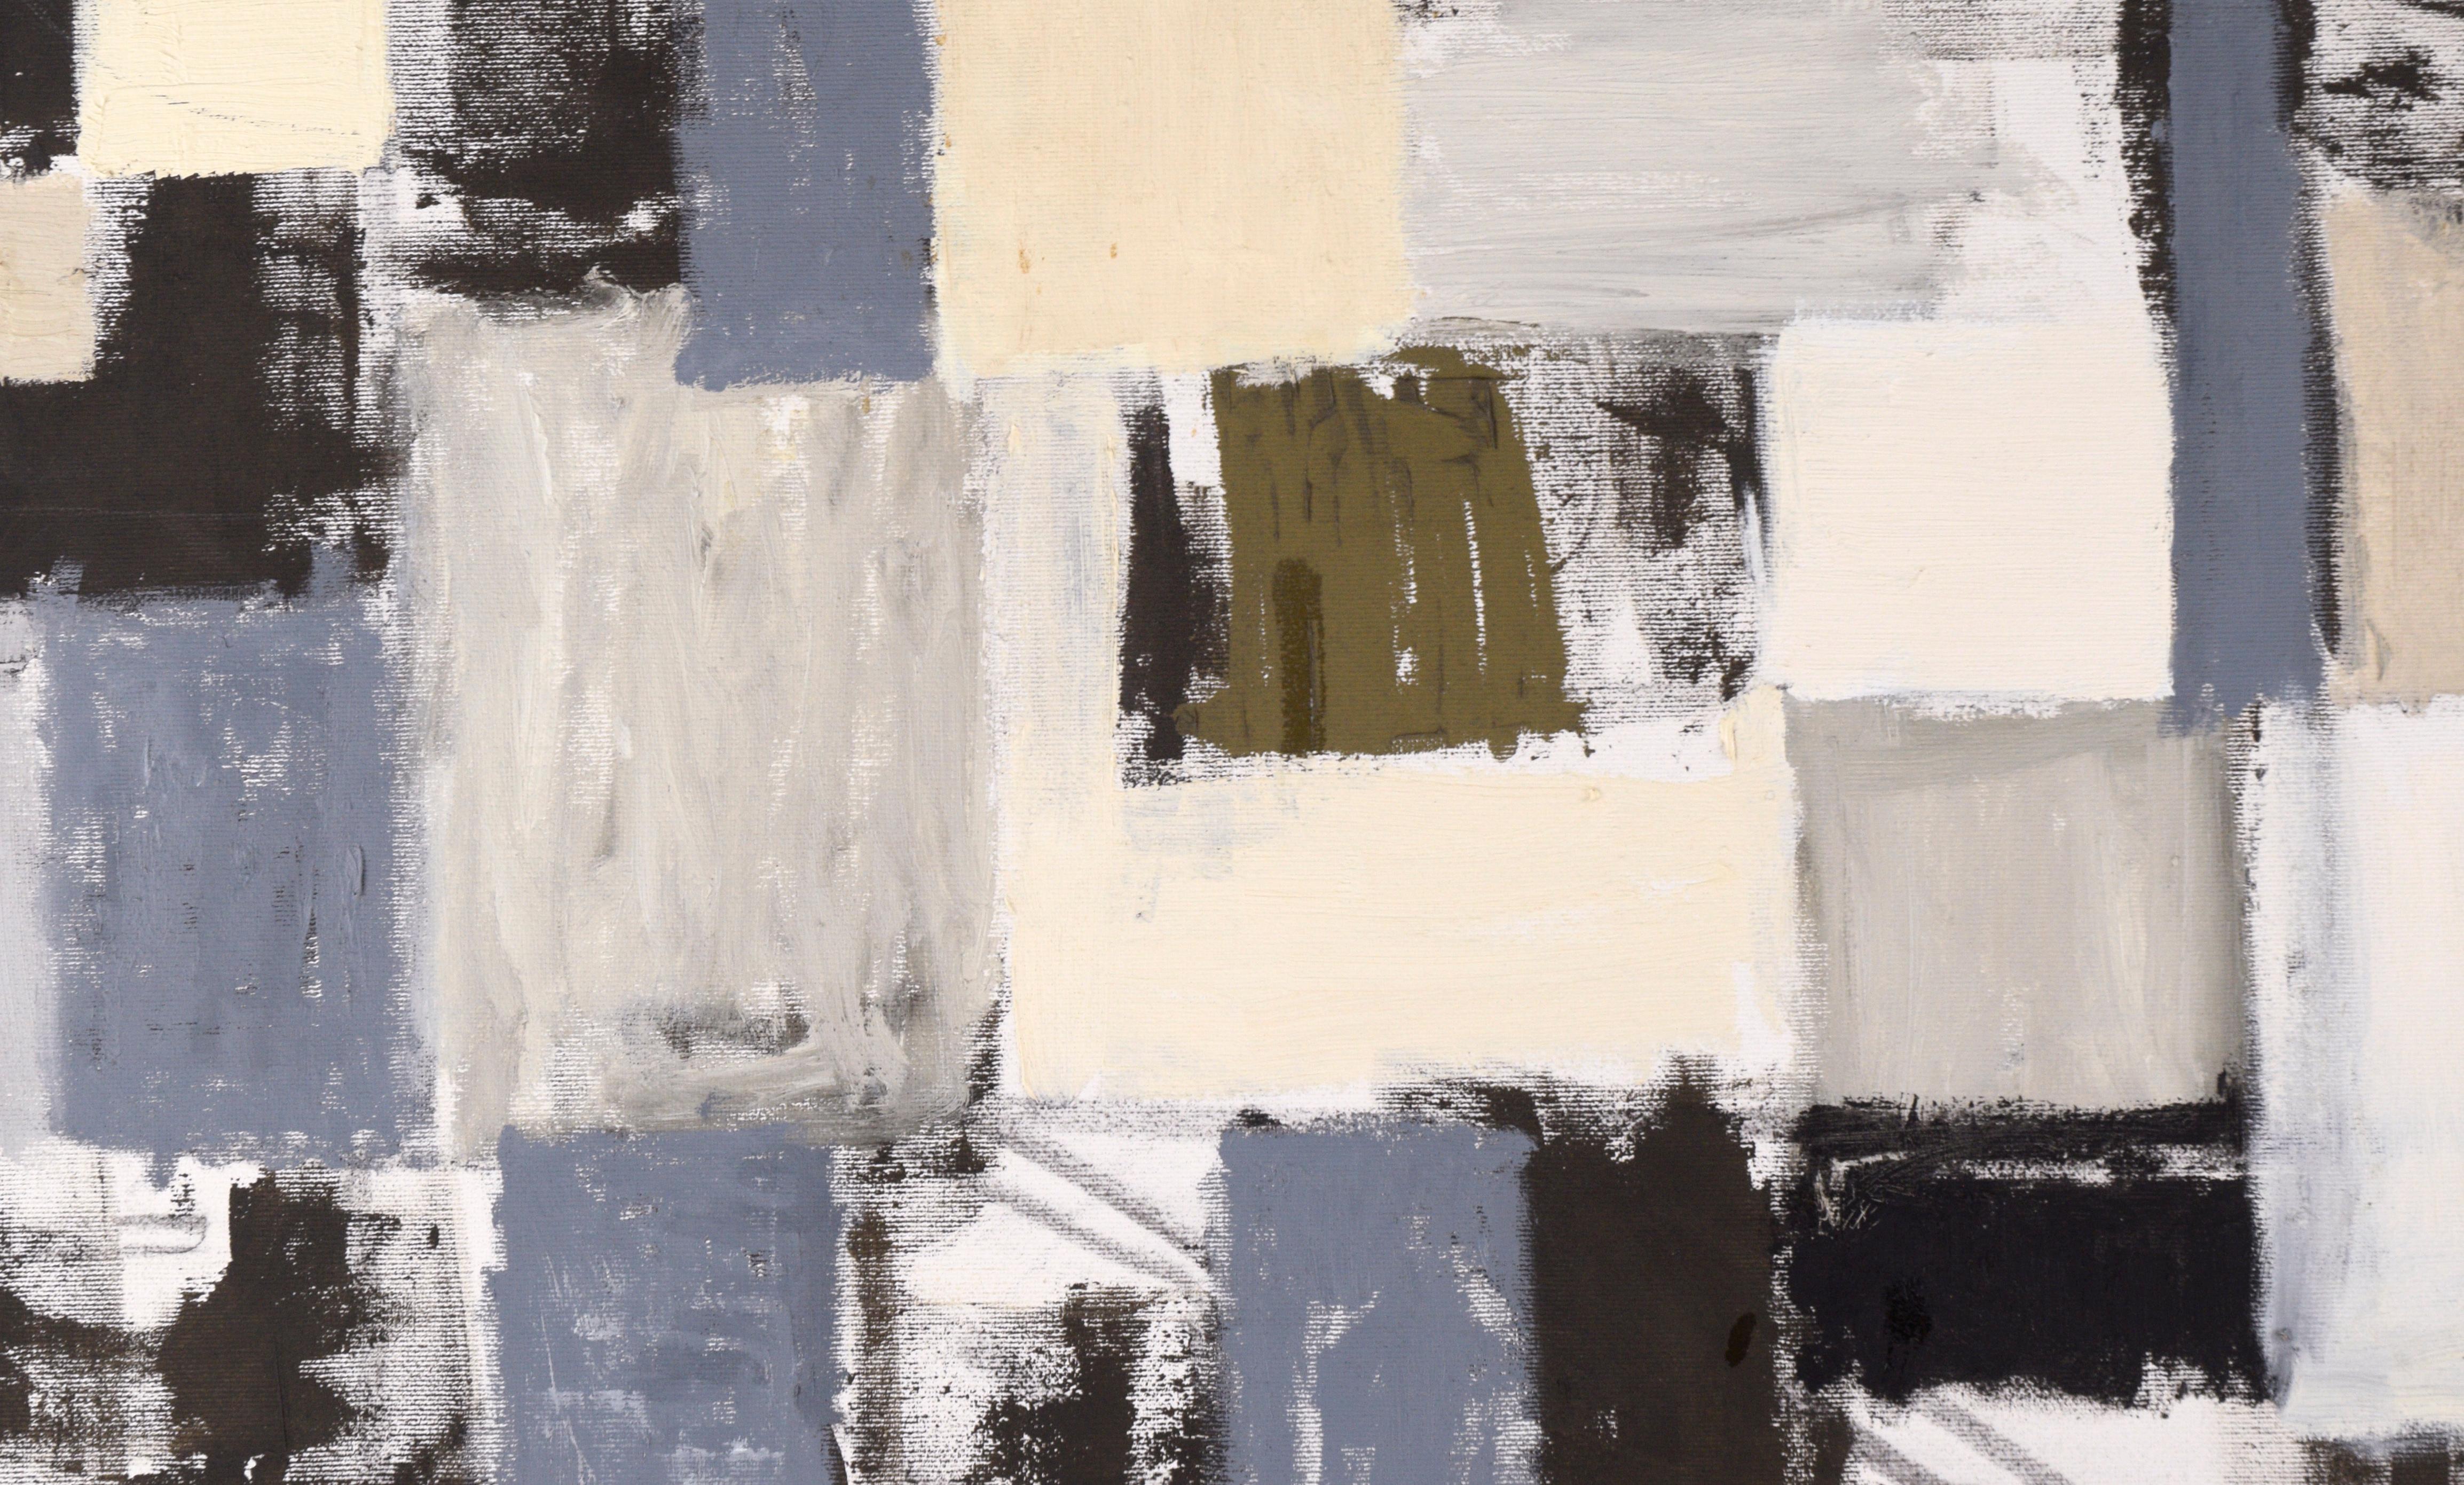 Urban Geometric Abstract - Gray Abstract Painting by Michael Pauker 